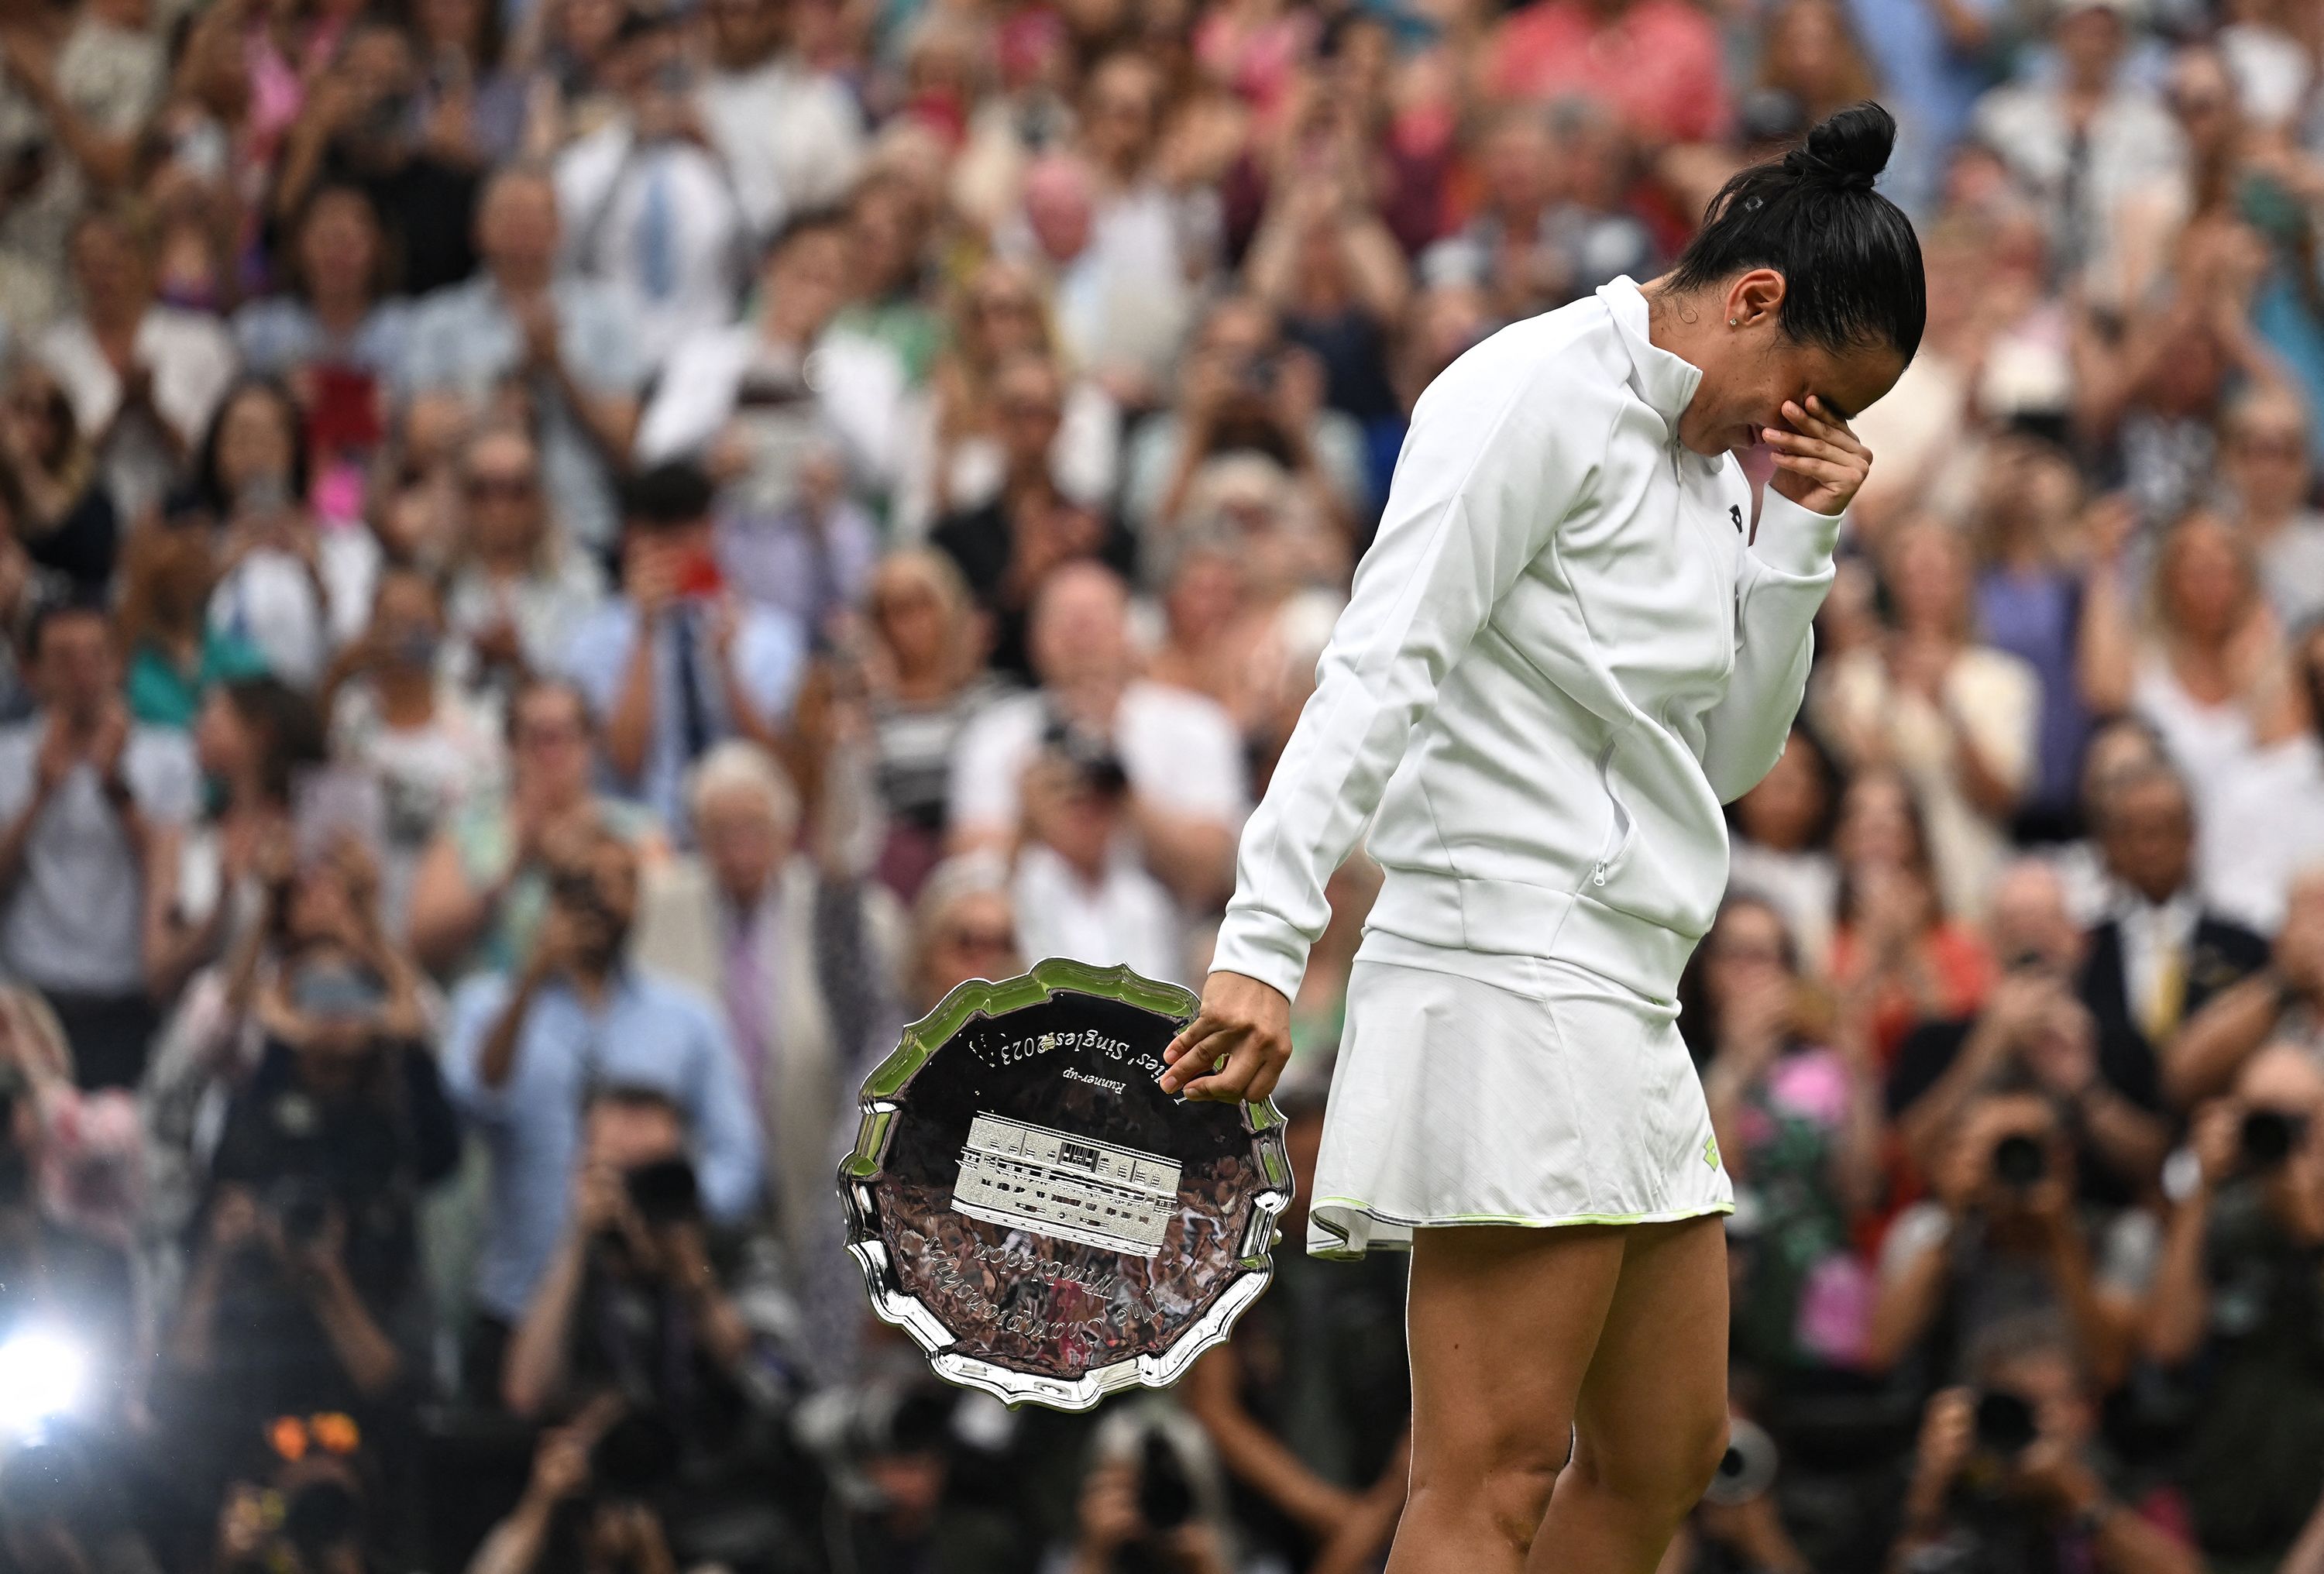 Wimbledon 2021: The Official Review of The Championships